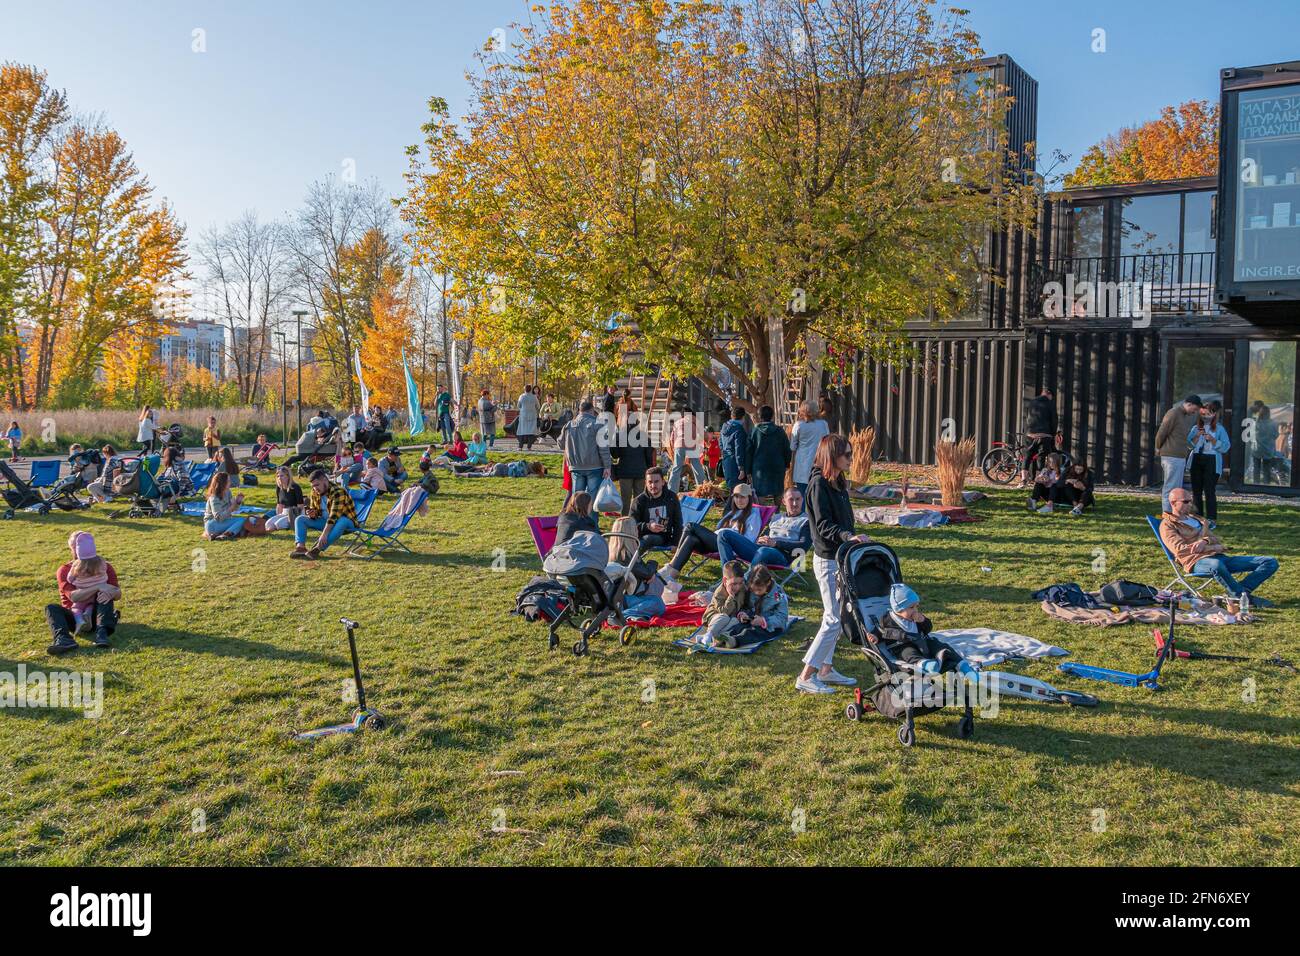 Kazan, Russia - October 03, 2020: Residents walk, relax, sit and lie on the lawn in the city park on a sunny autumn day Stock Photo